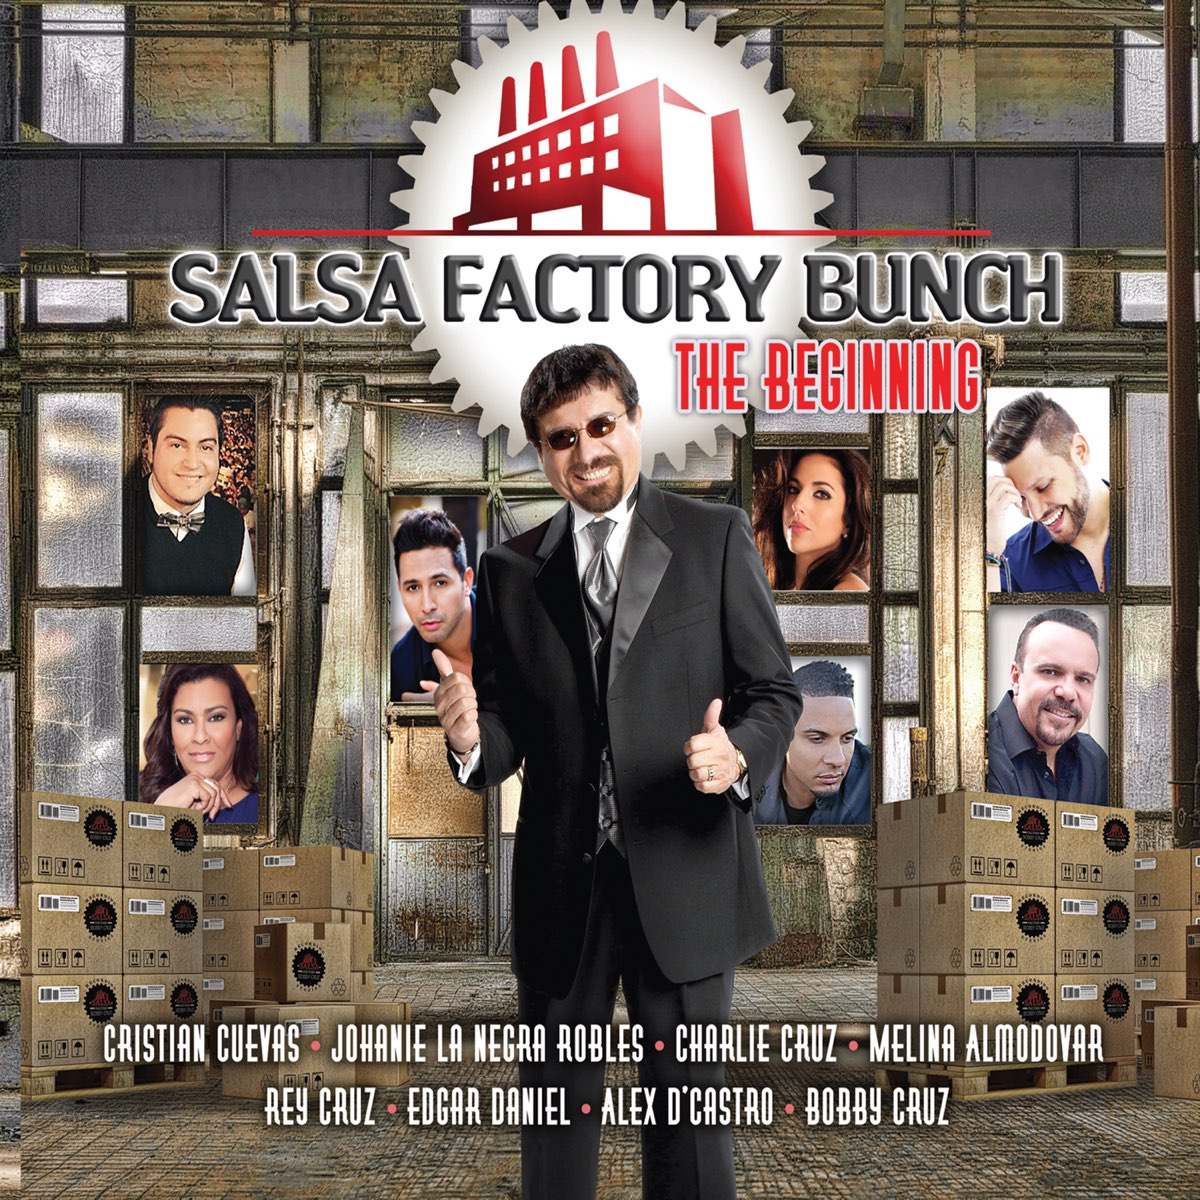 Salsa Factory Bunch: The Beginning by Various Artists on Apple Music